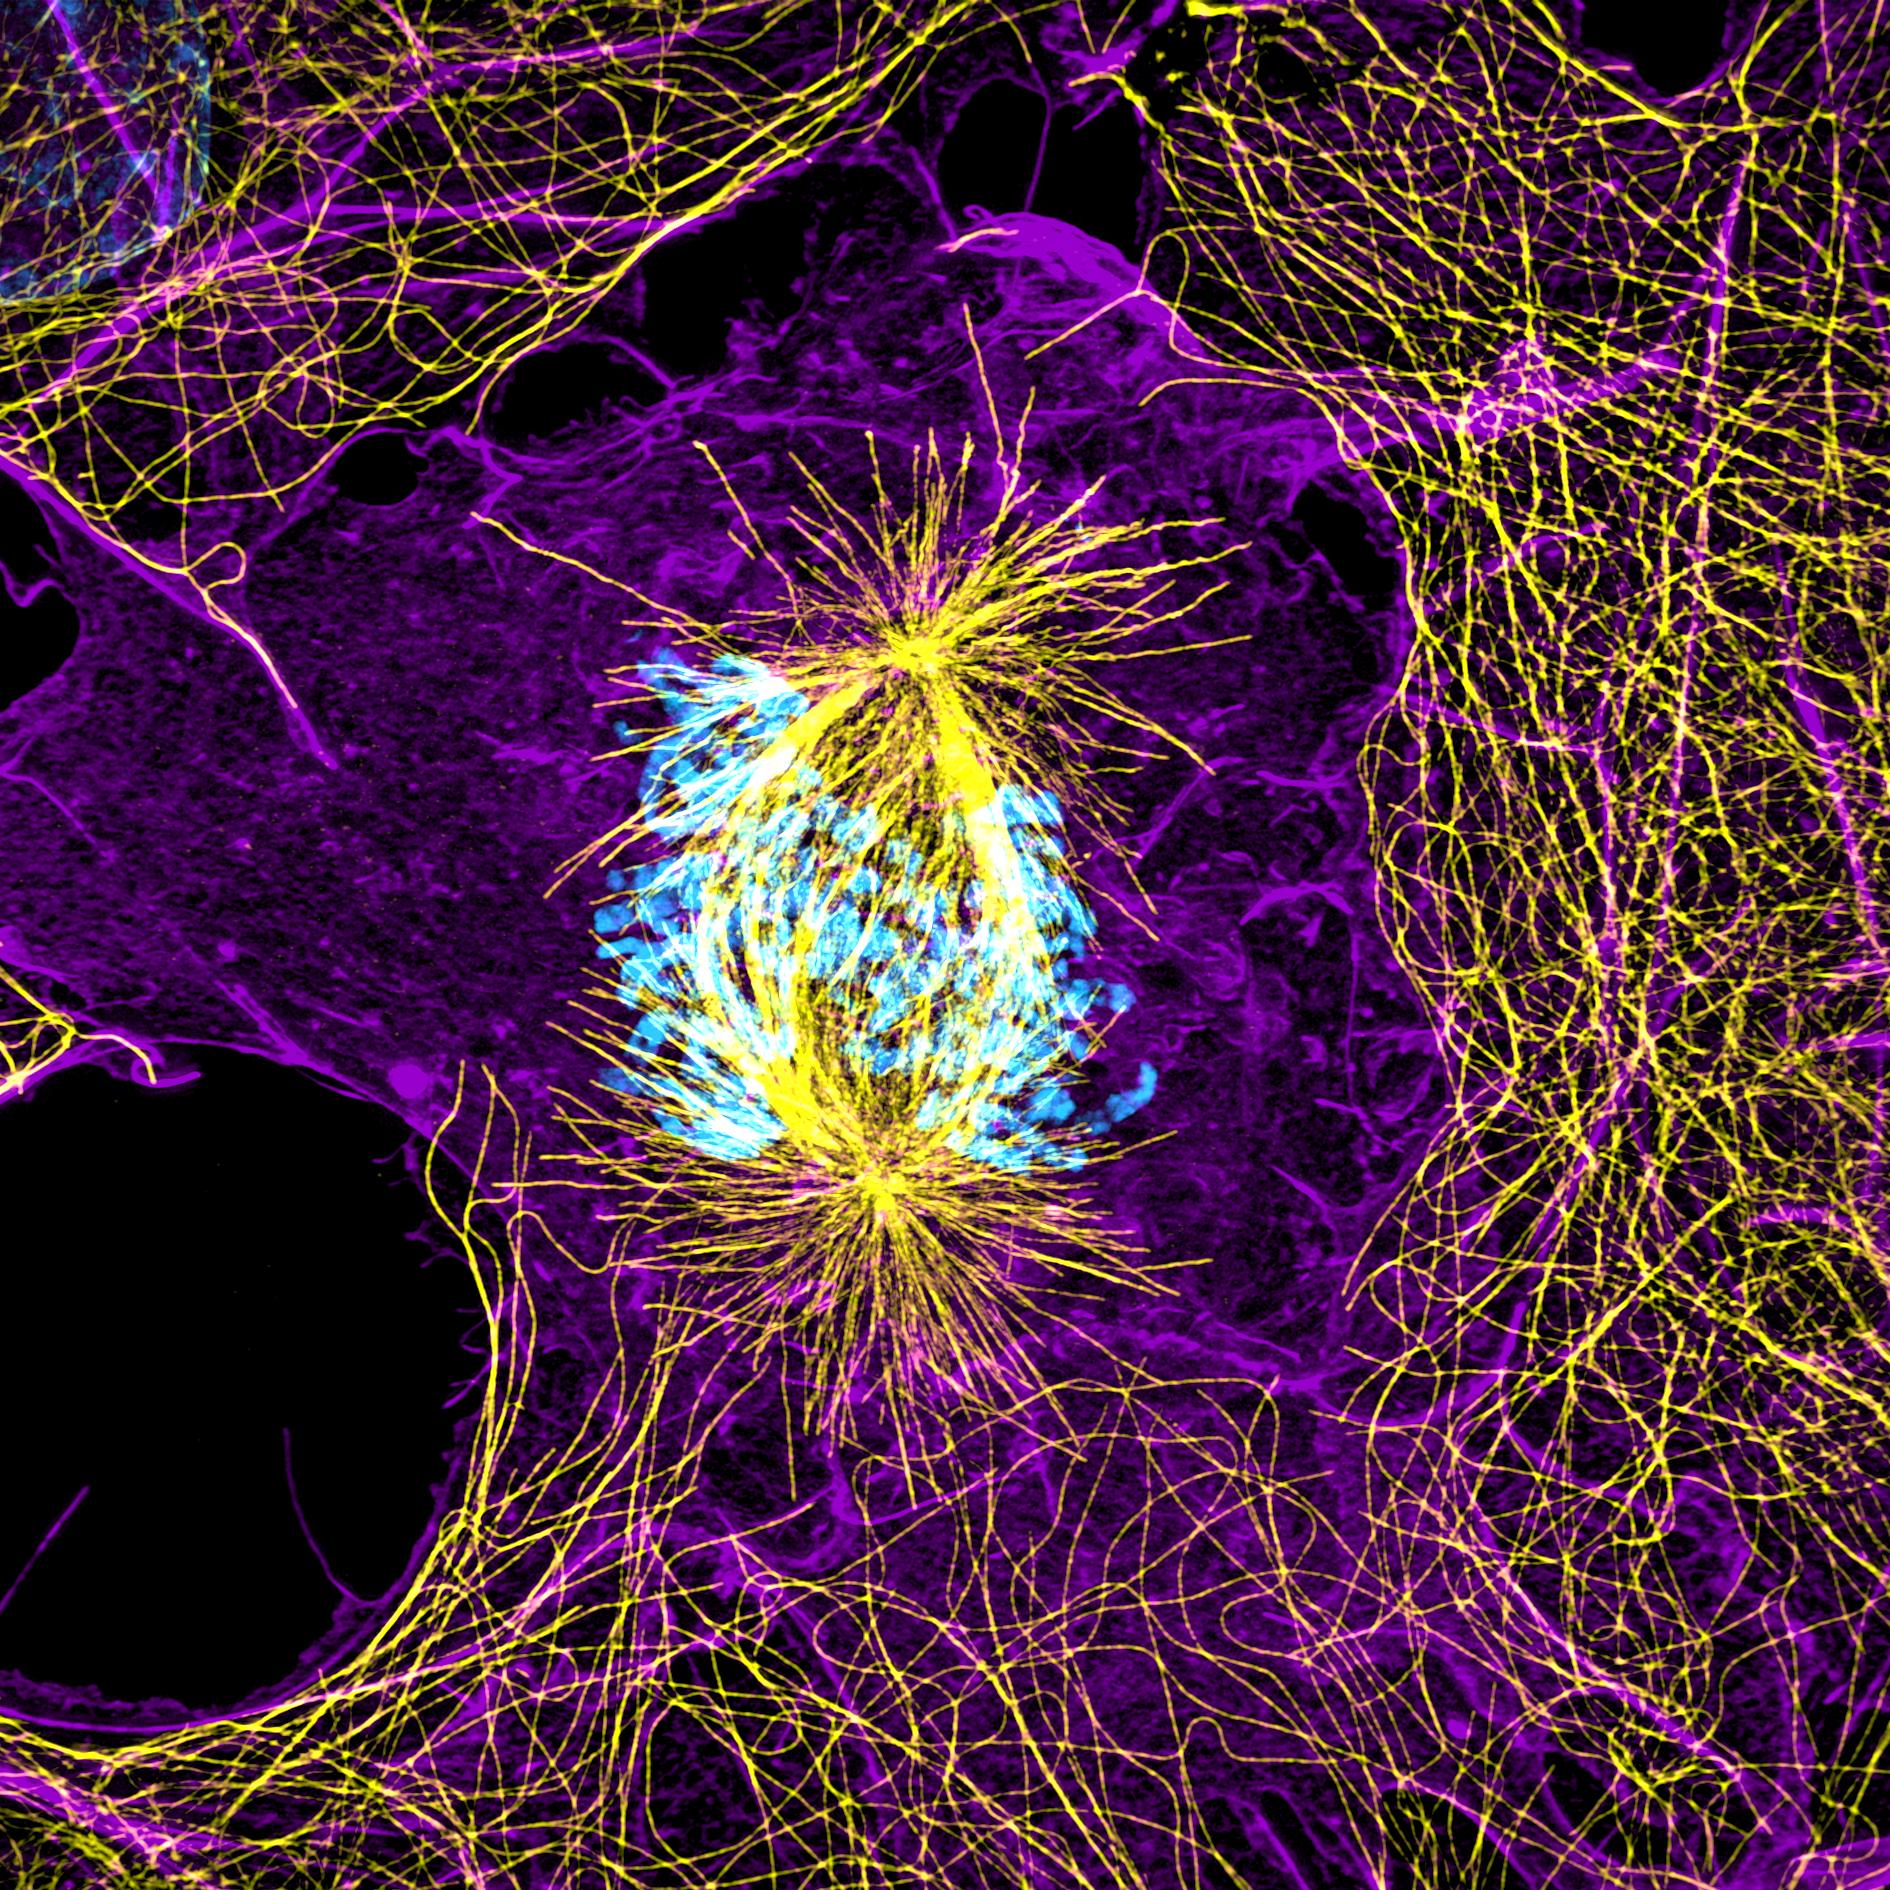 Image captured with ZEISS ELYRA. Lattice SIM: Comparison of widefield and Lattice SIM images of a Cos-7 cell undergoing mitosis stained for actin (Phalloidin Alexa Fluor 568, magenta), microtubules (anti-beta-tubulin Alexa Fluor 488, yellow) and nucleus (Hoechst, blue). Images are maximum intensity projections of 30 planes of a total depth of 3.19 µm. Objective: Plan-Apochromat 63×/1.4 Oil